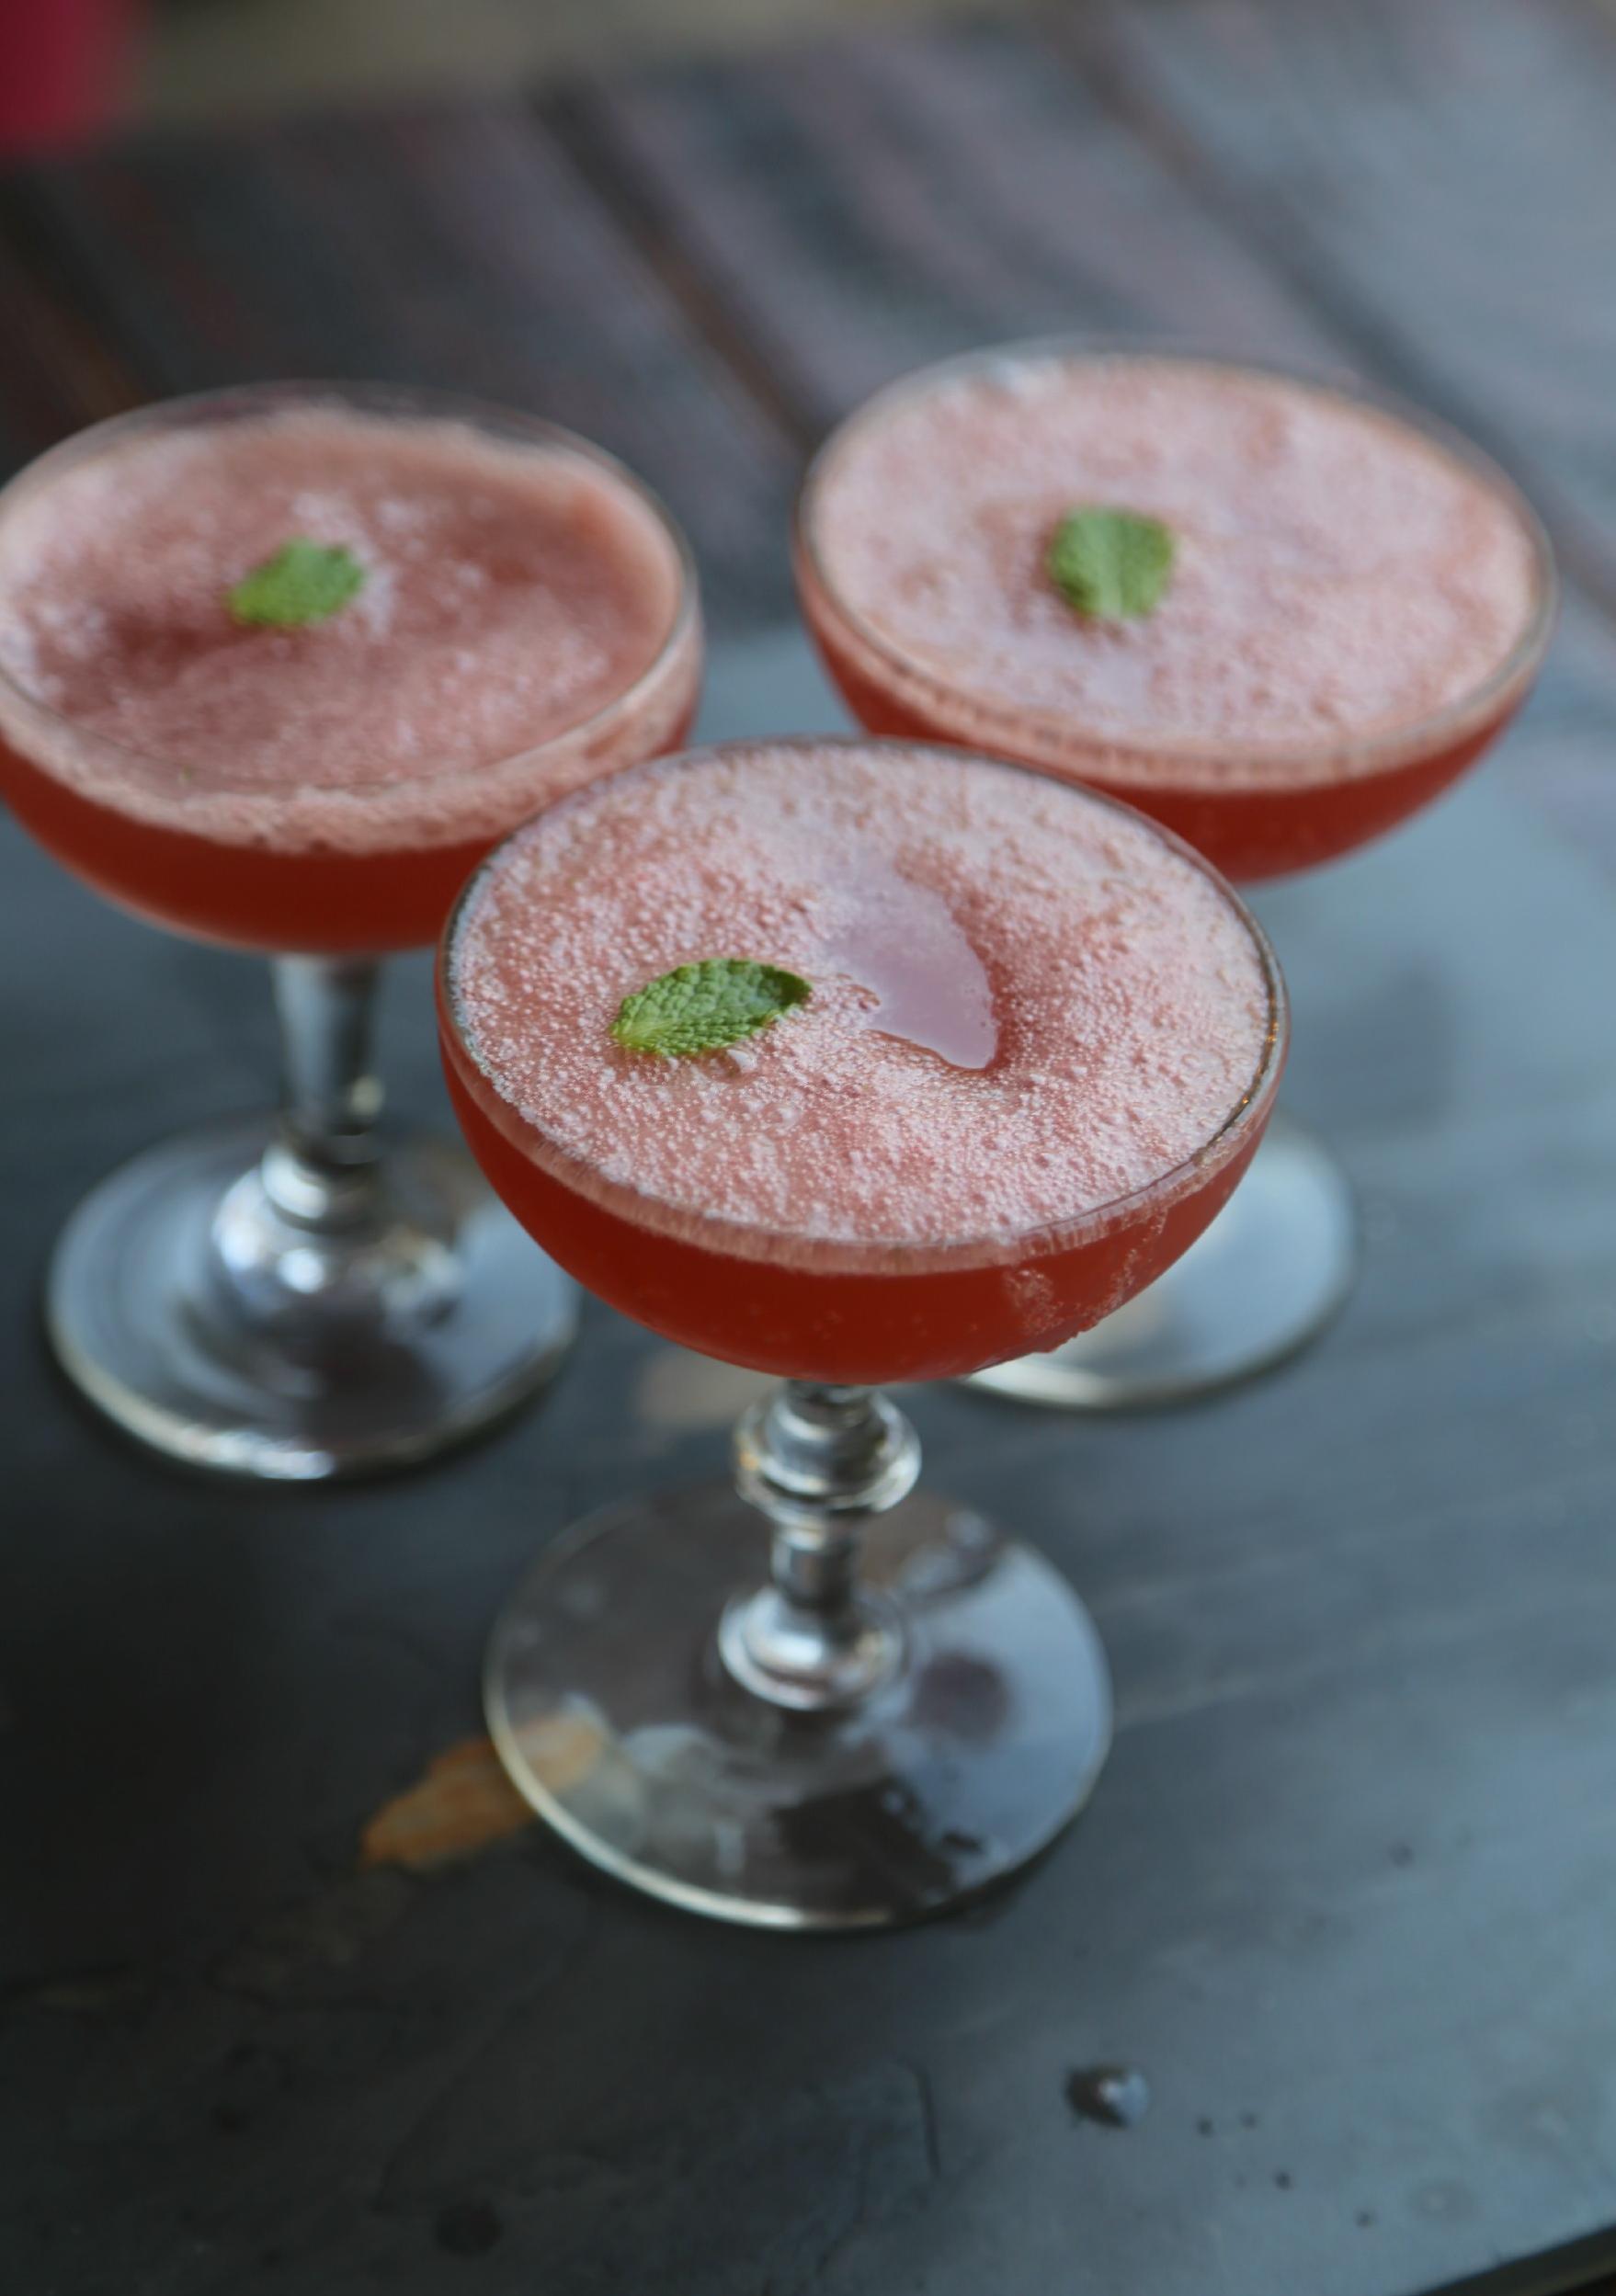  Nothing beats the sweetness of fresh watermelon in a cocktail